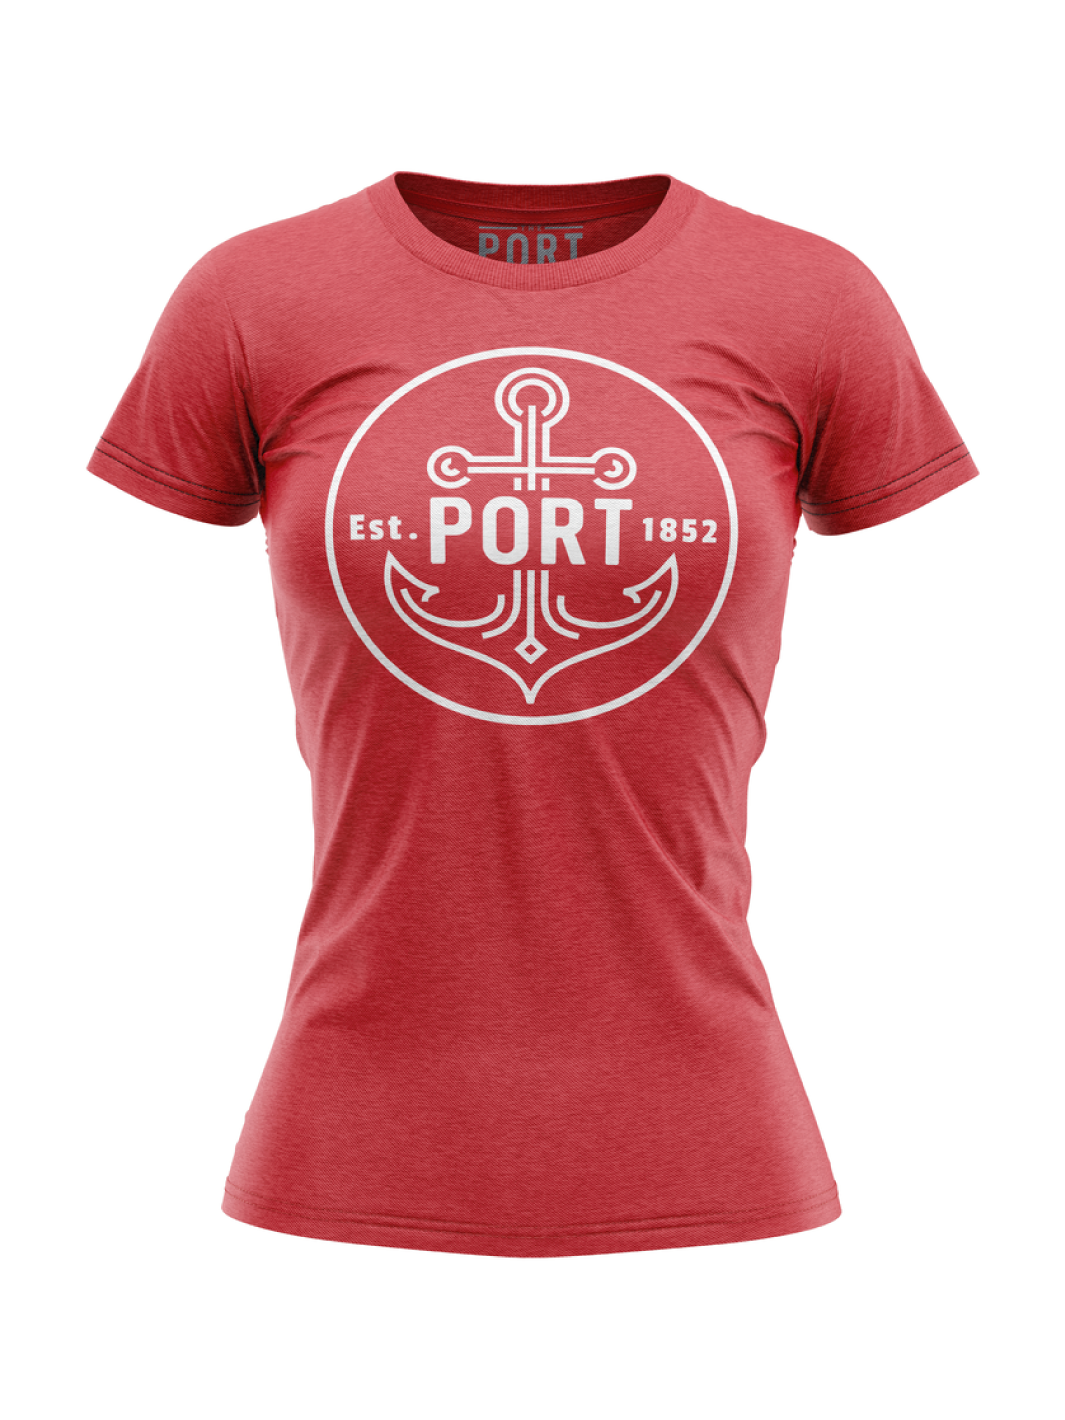 Womens Heathered Red Port Anchor Tee